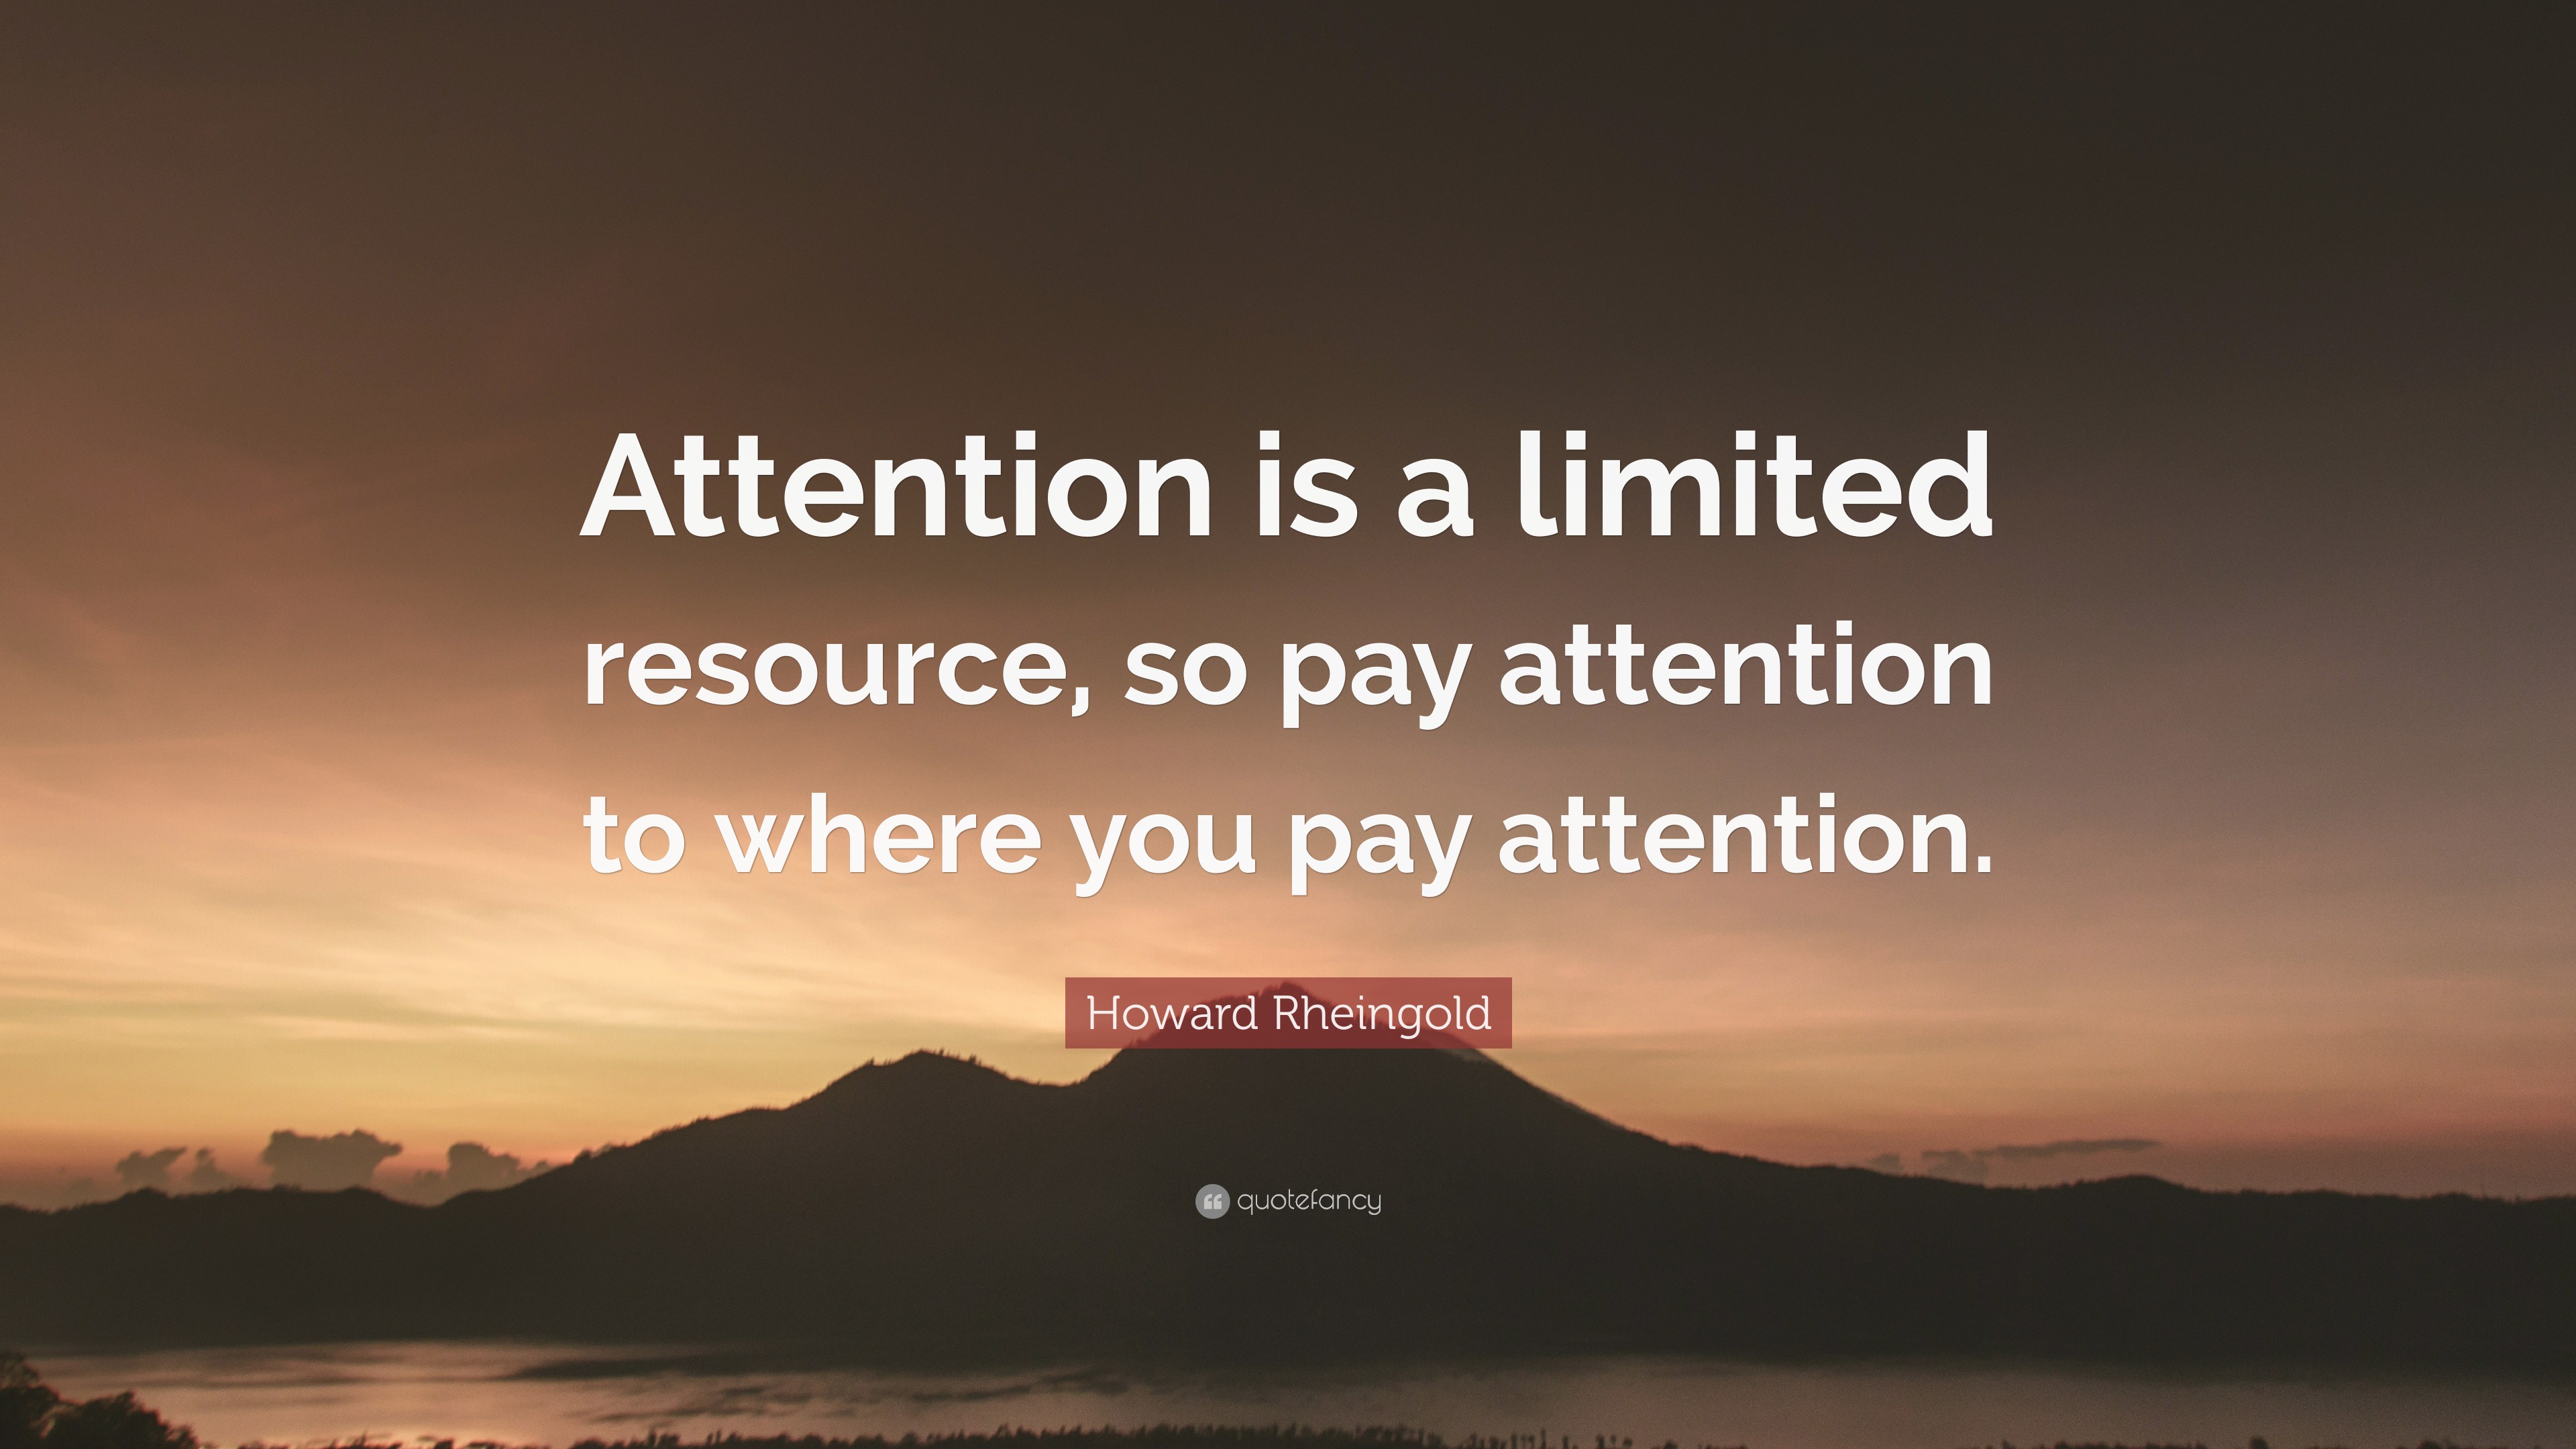 Howard Rheingold Quote: "Attention is a limited resource, so pay attention to where you pay ...